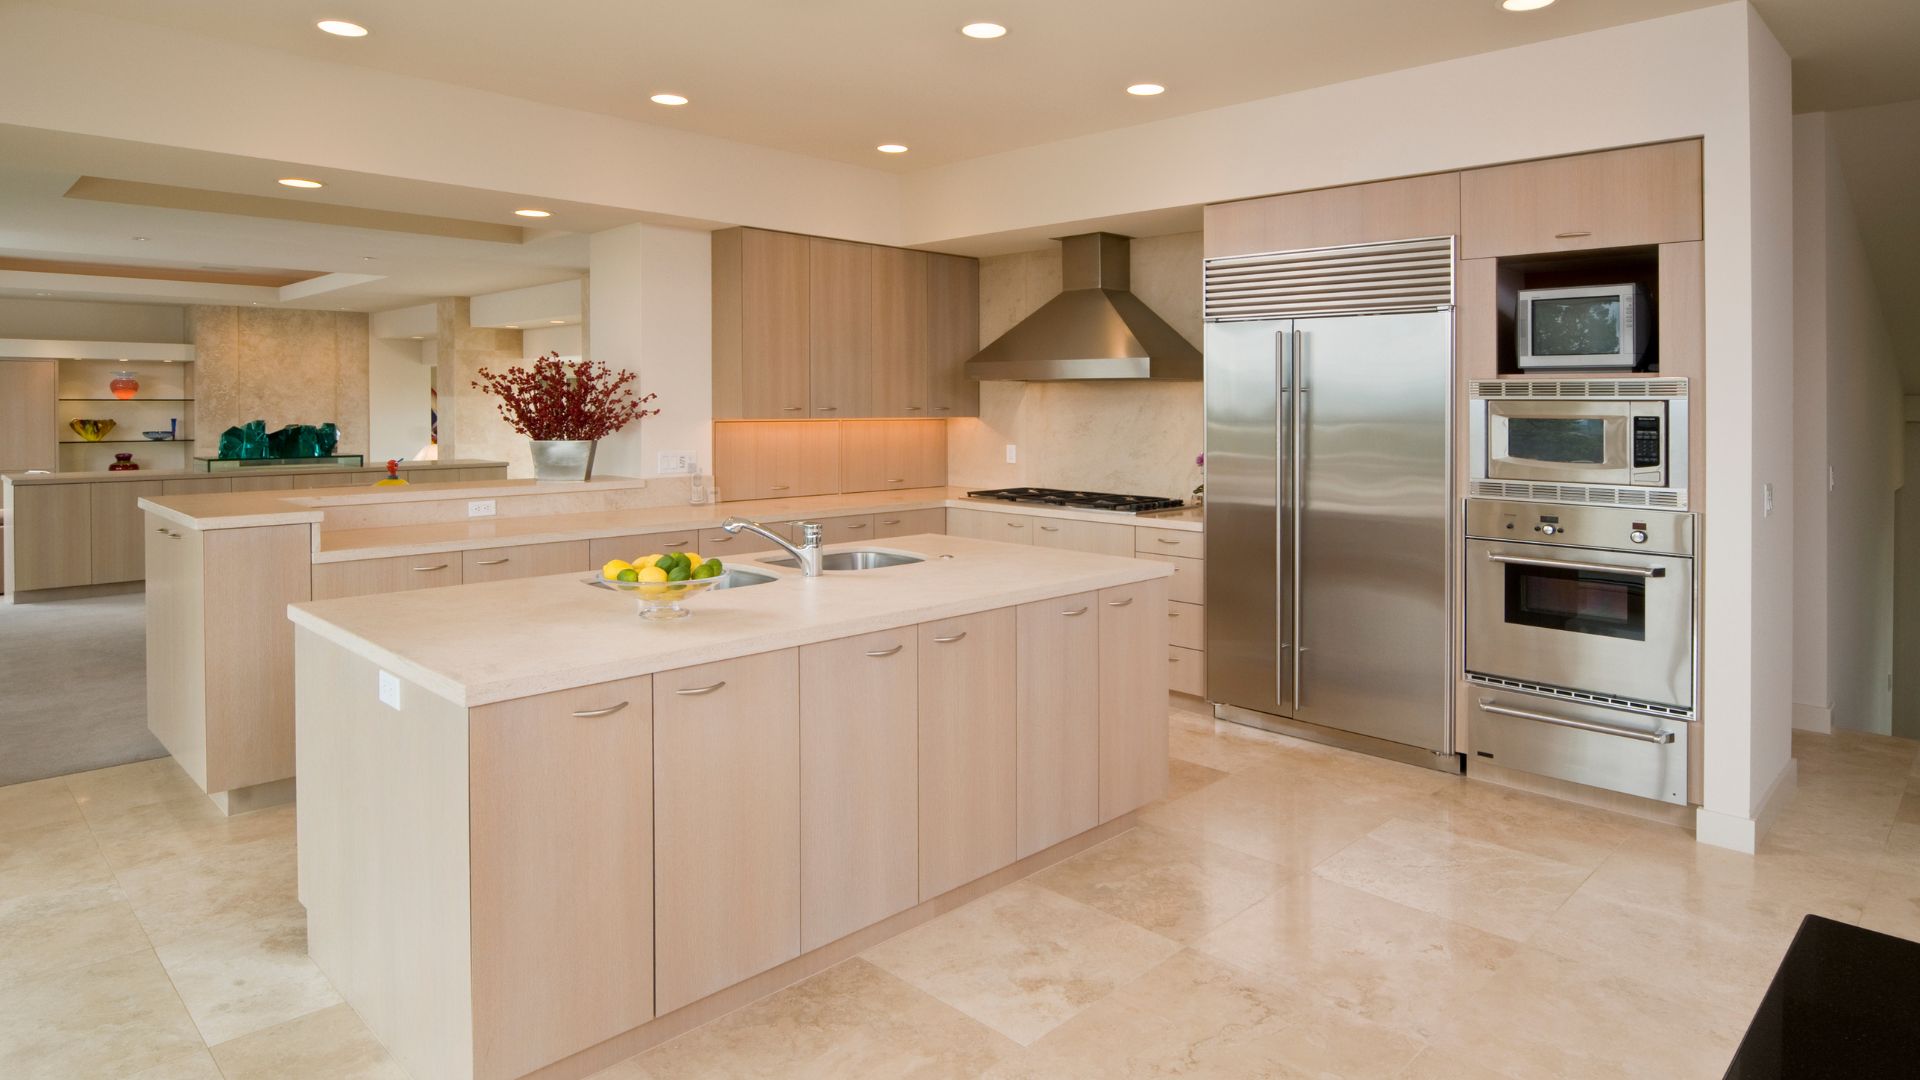 Modern kitchen style in cream countertop and cabinets